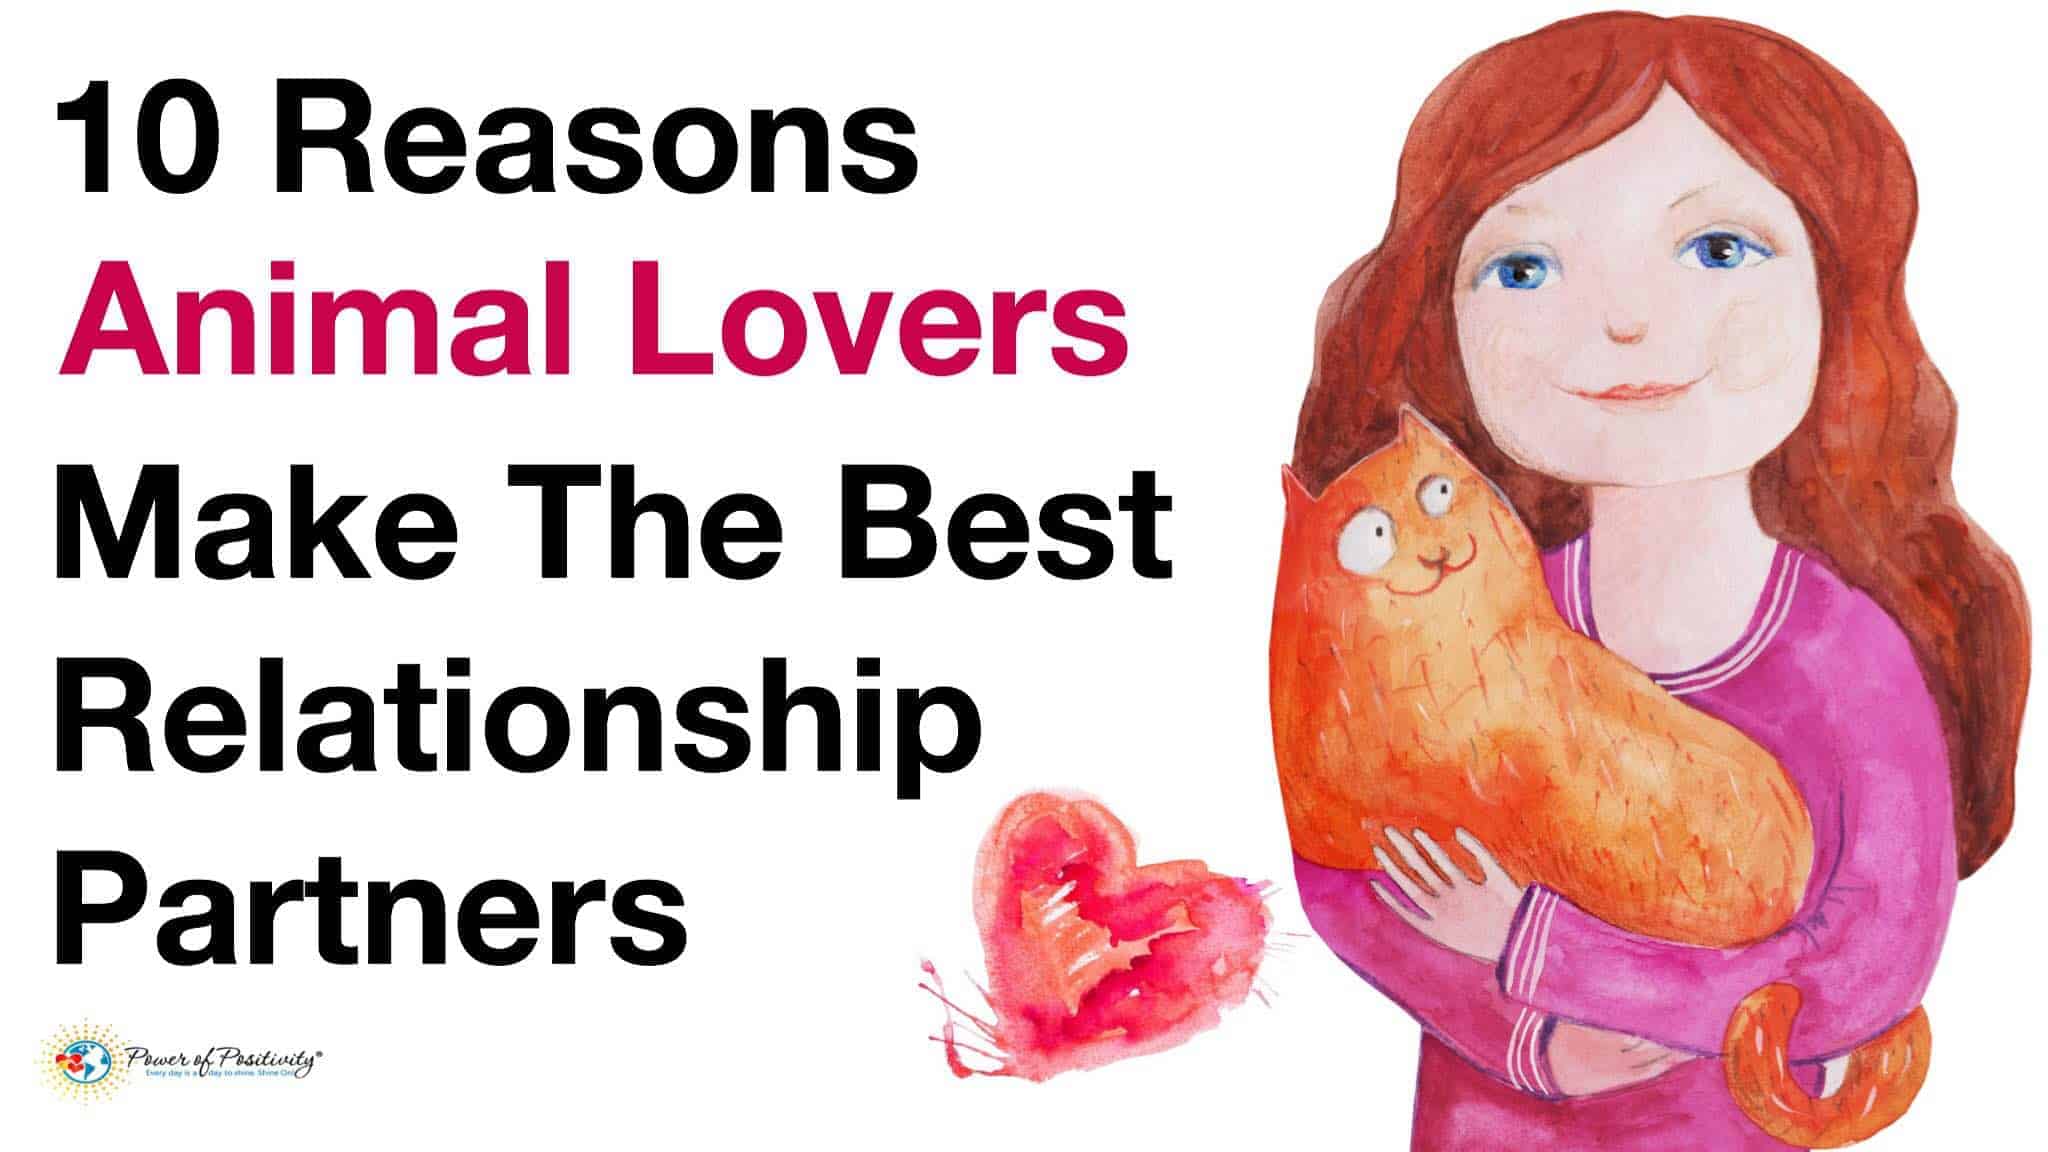 10 Reasons Why Animal Lovers Make The Best Relationship Partners